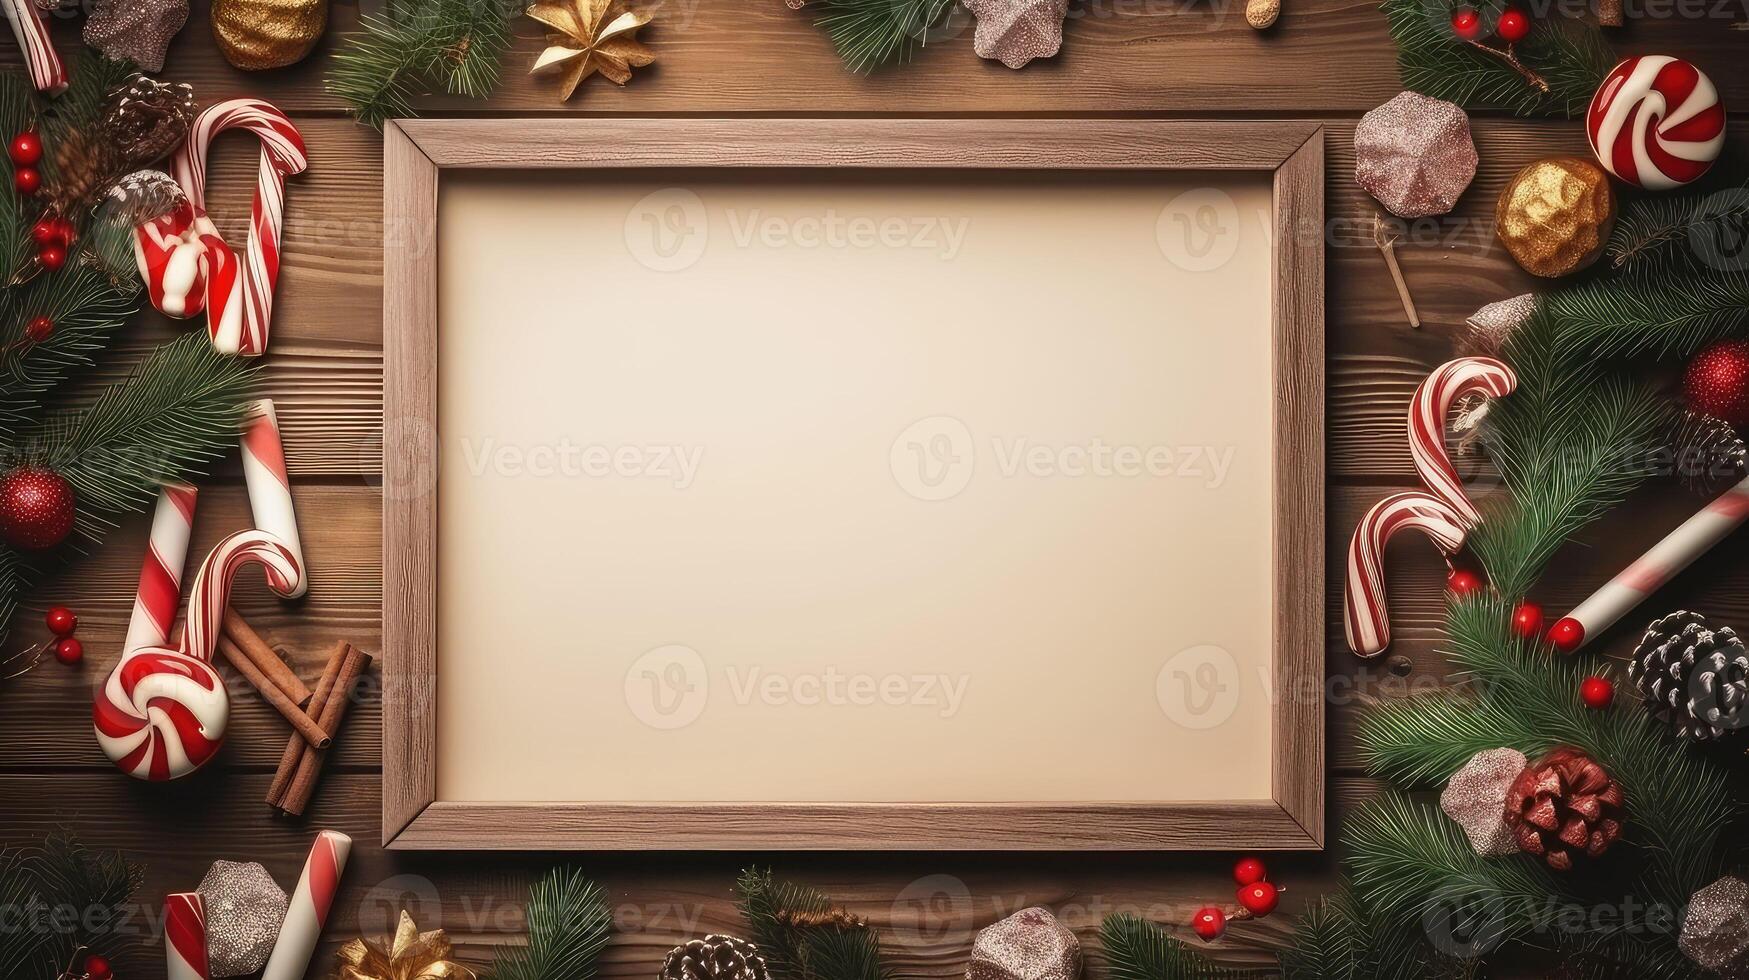 Empty boho style photo frame on wooden background. Isolated white light wood frame layout horizontal signage for artwork, lettering or logo. Copy space for site or banner.. Created with